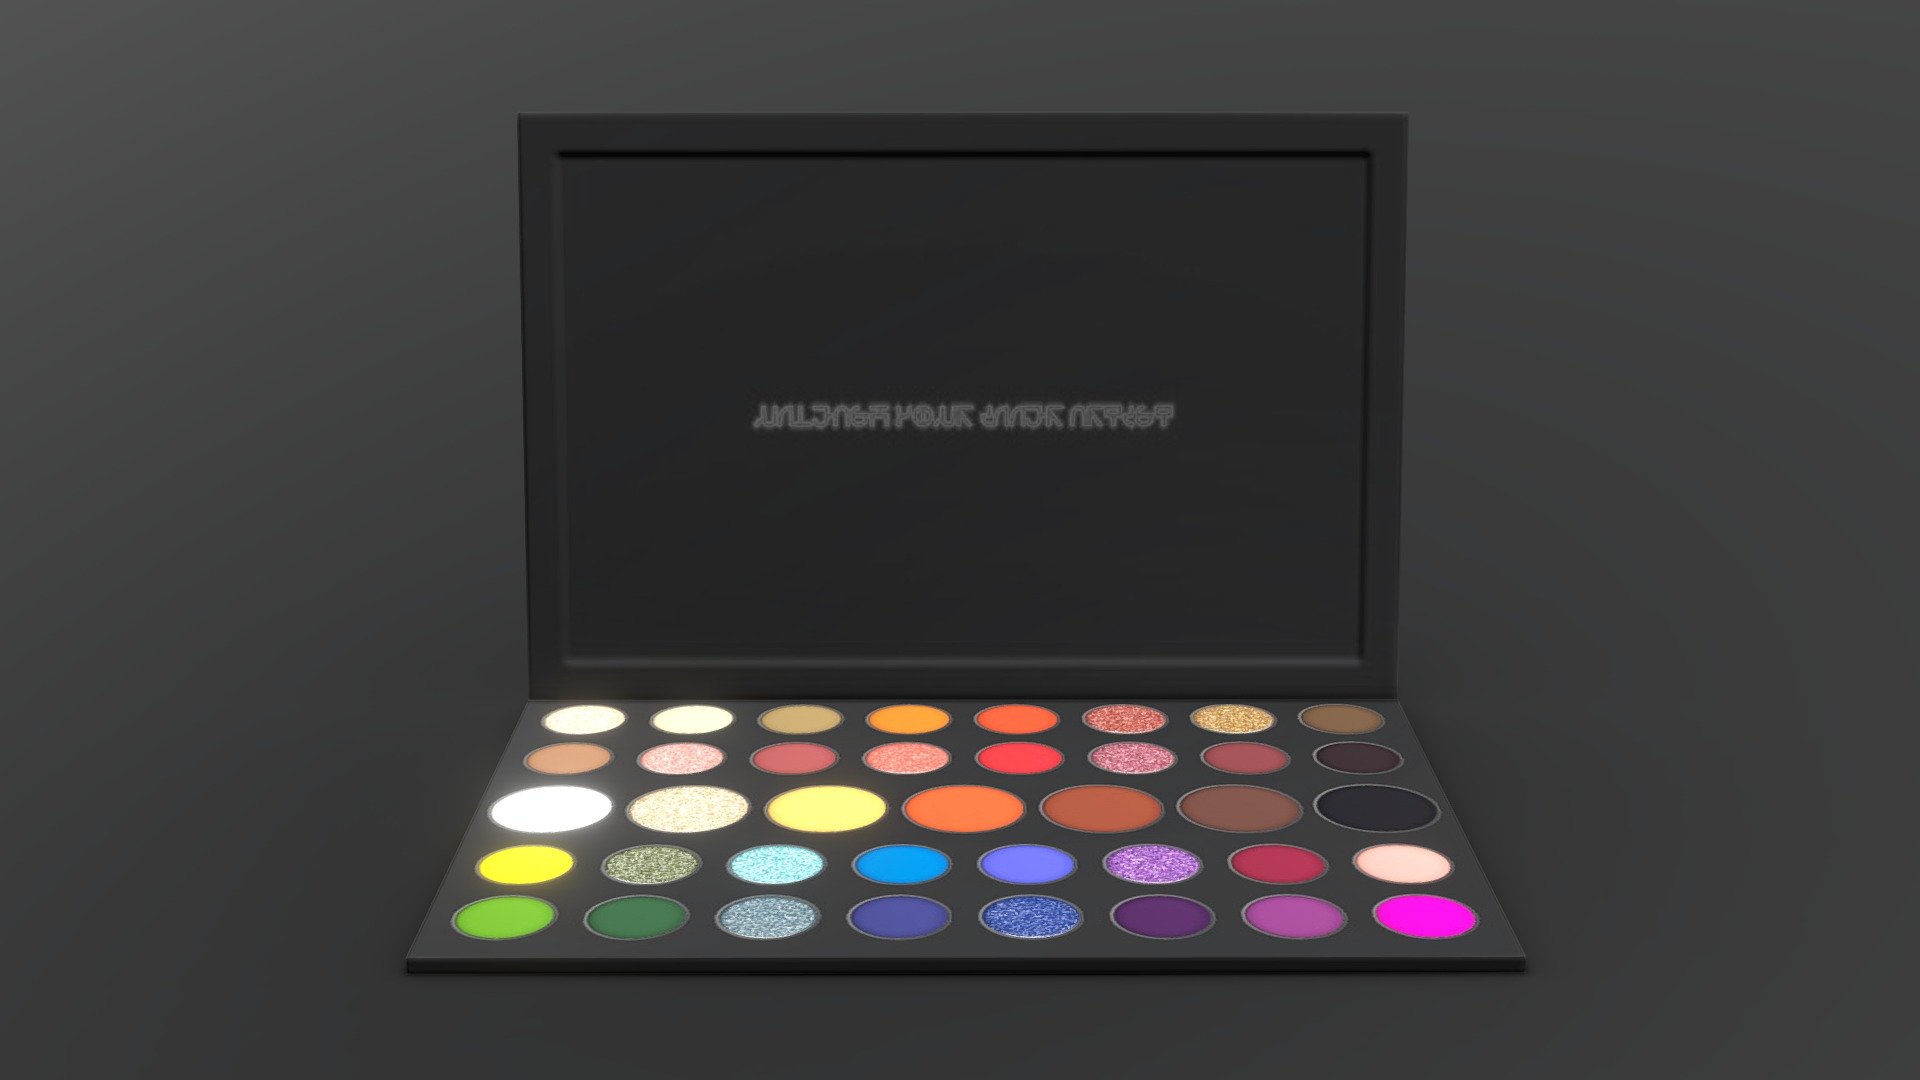 This is part of a mod set created for The Sims 4.
This is a replica, in the style of The Sims 4, of the eyeshadow palette by Morphe Brushes in collaboration with beauty influencer James Charles. It features a mix of matte shadows and shimmer shadows. The glittery shimmer finish was achieved by using a noisy normal map area, combined with intense specular and sharp gloss 3d model